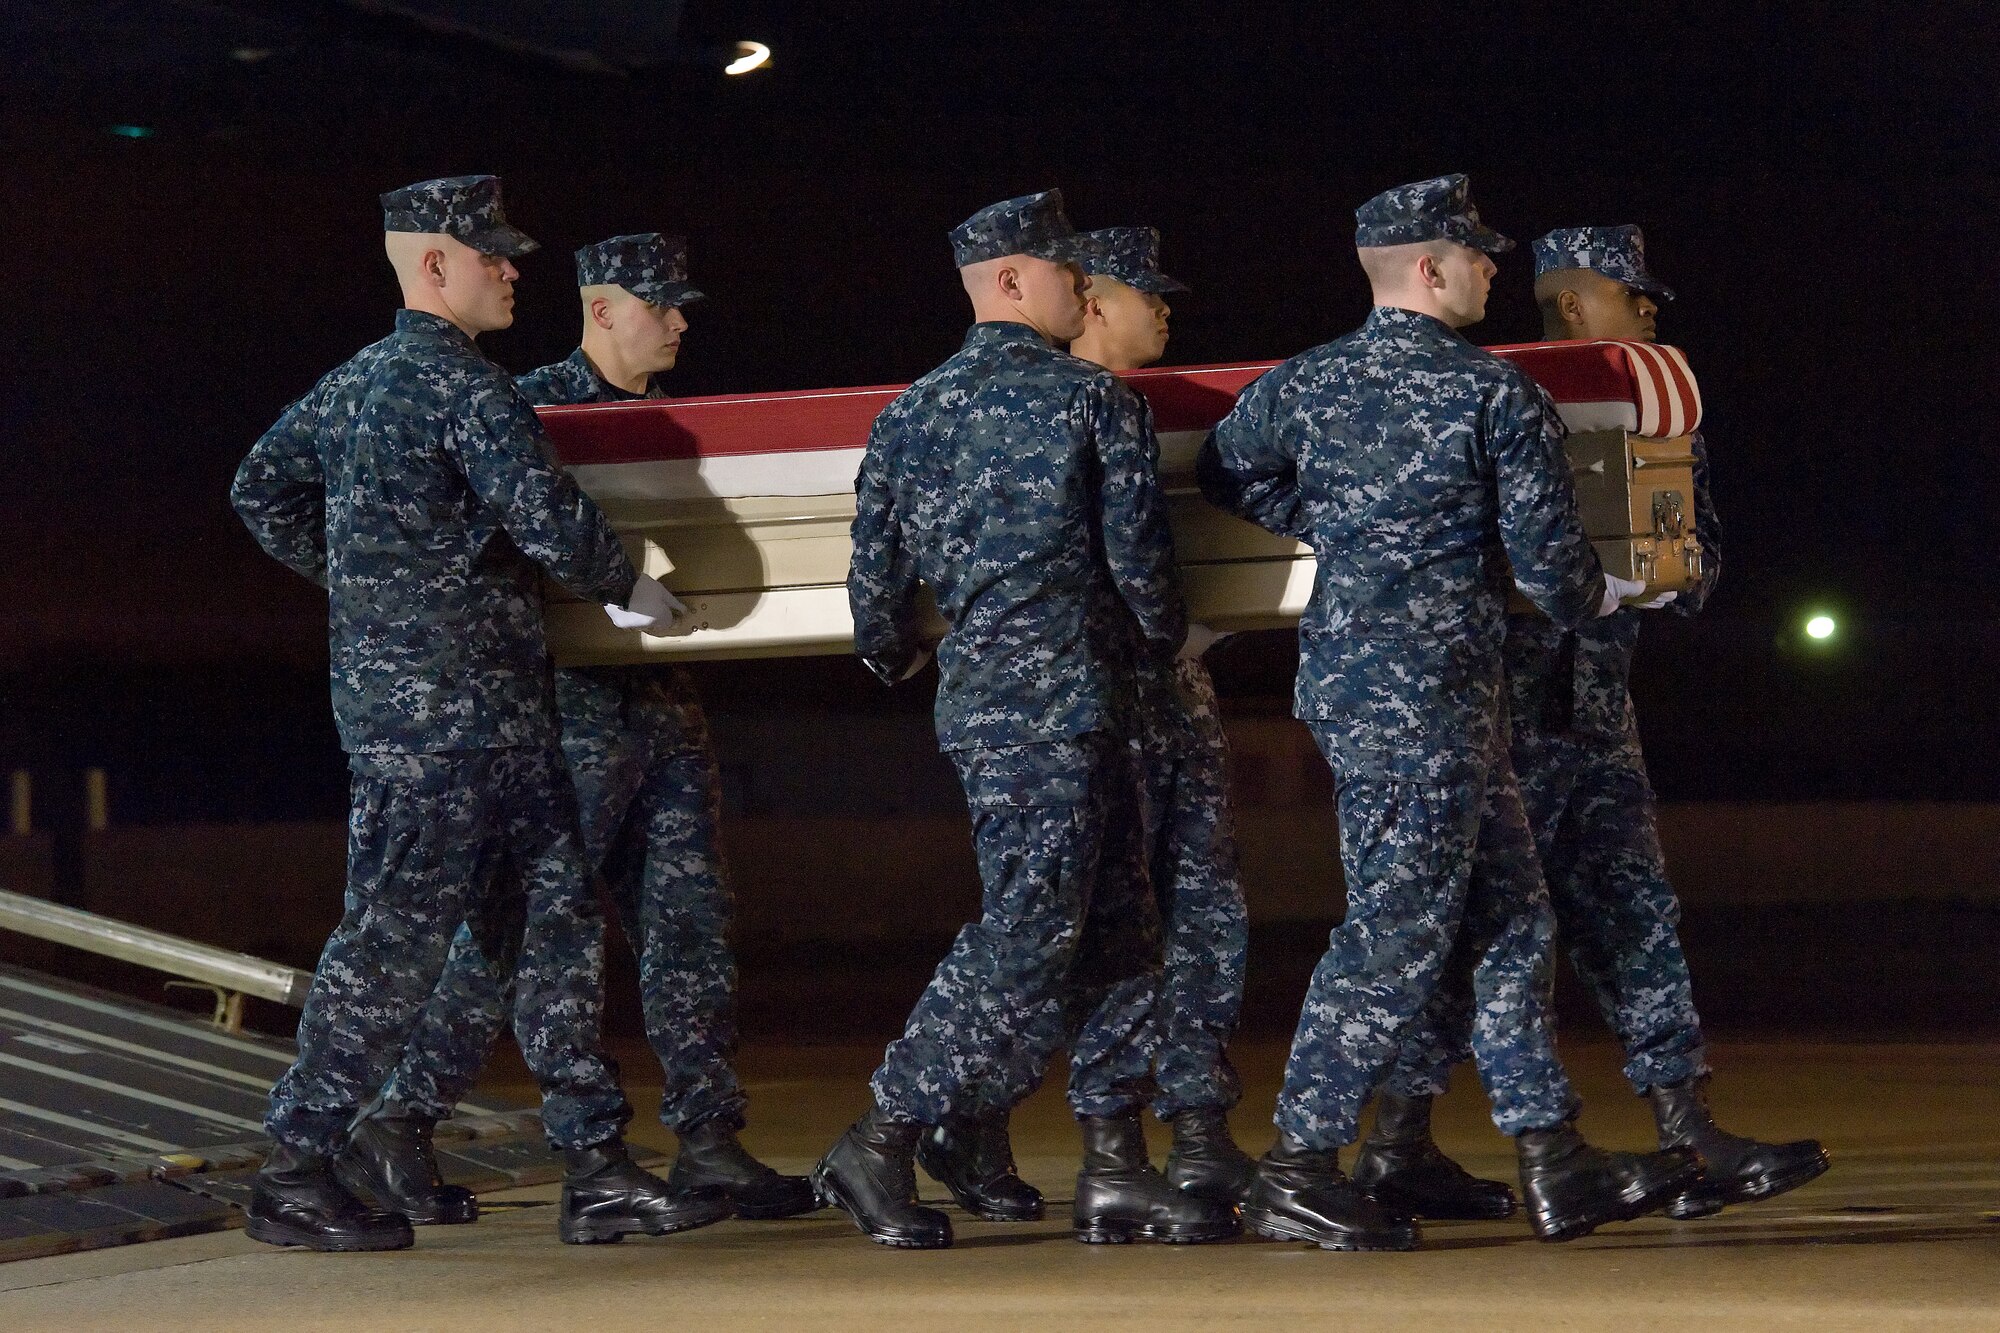 A U.S. Navy carry team transfers the remains of Navy civilian Michael M. Baptiste, of Brooklyn, N.Y., during a dignified transfer May 1, 2016, at New Castle Air National Guard Base, New Castle, Del. Mr. Baptiste was assigned to Forward Deployed Regional Maintenance Center Detachment Bahrain at Naval Support Activity Bahrain. (U.S. Air Force photo/Roland Balik)